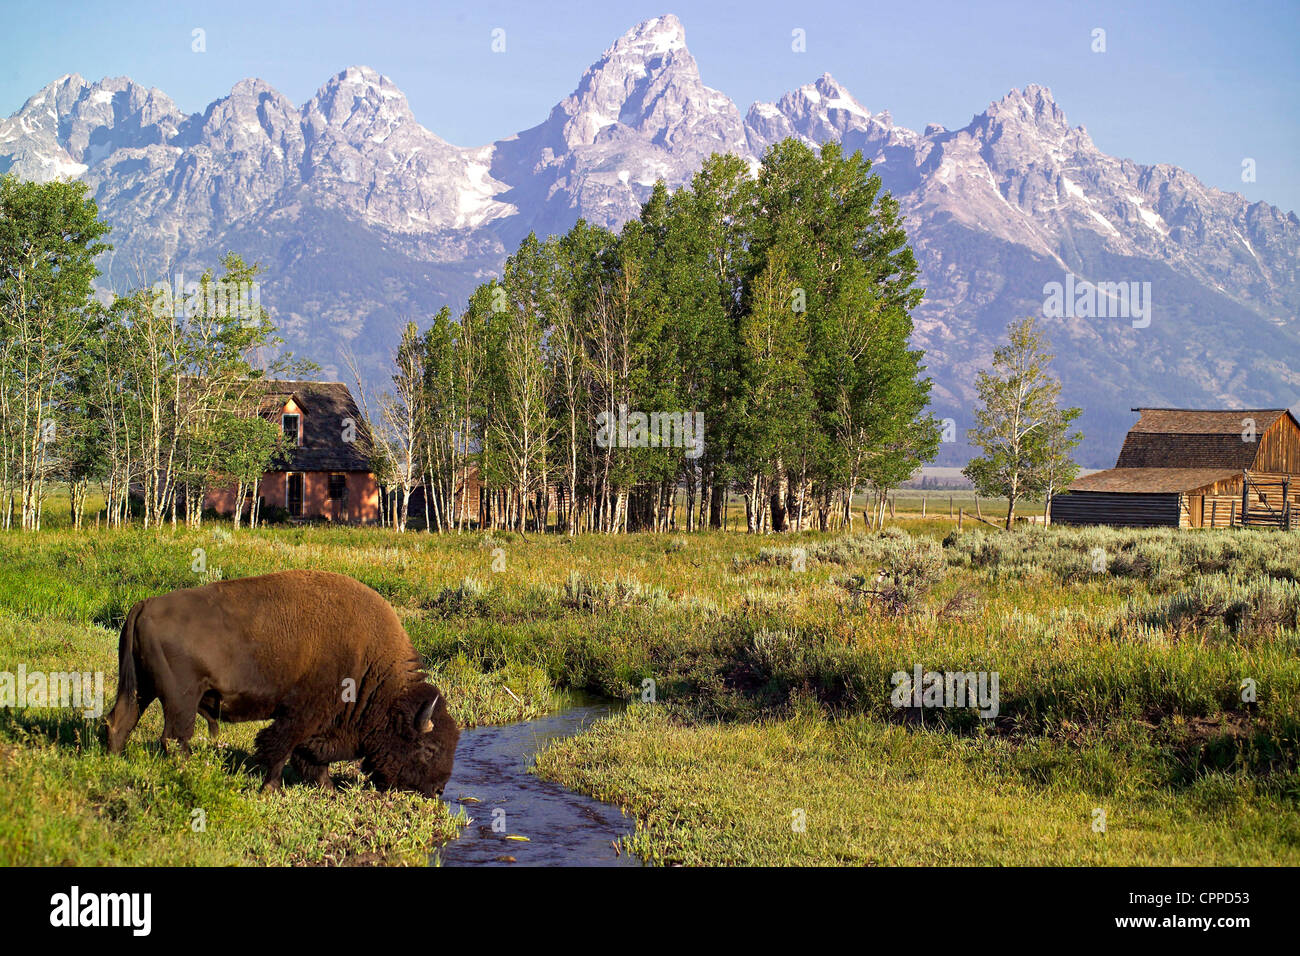 Jul 21, 2006; Jackson Hole, Wyoming, USA; A Bison, often referred to as